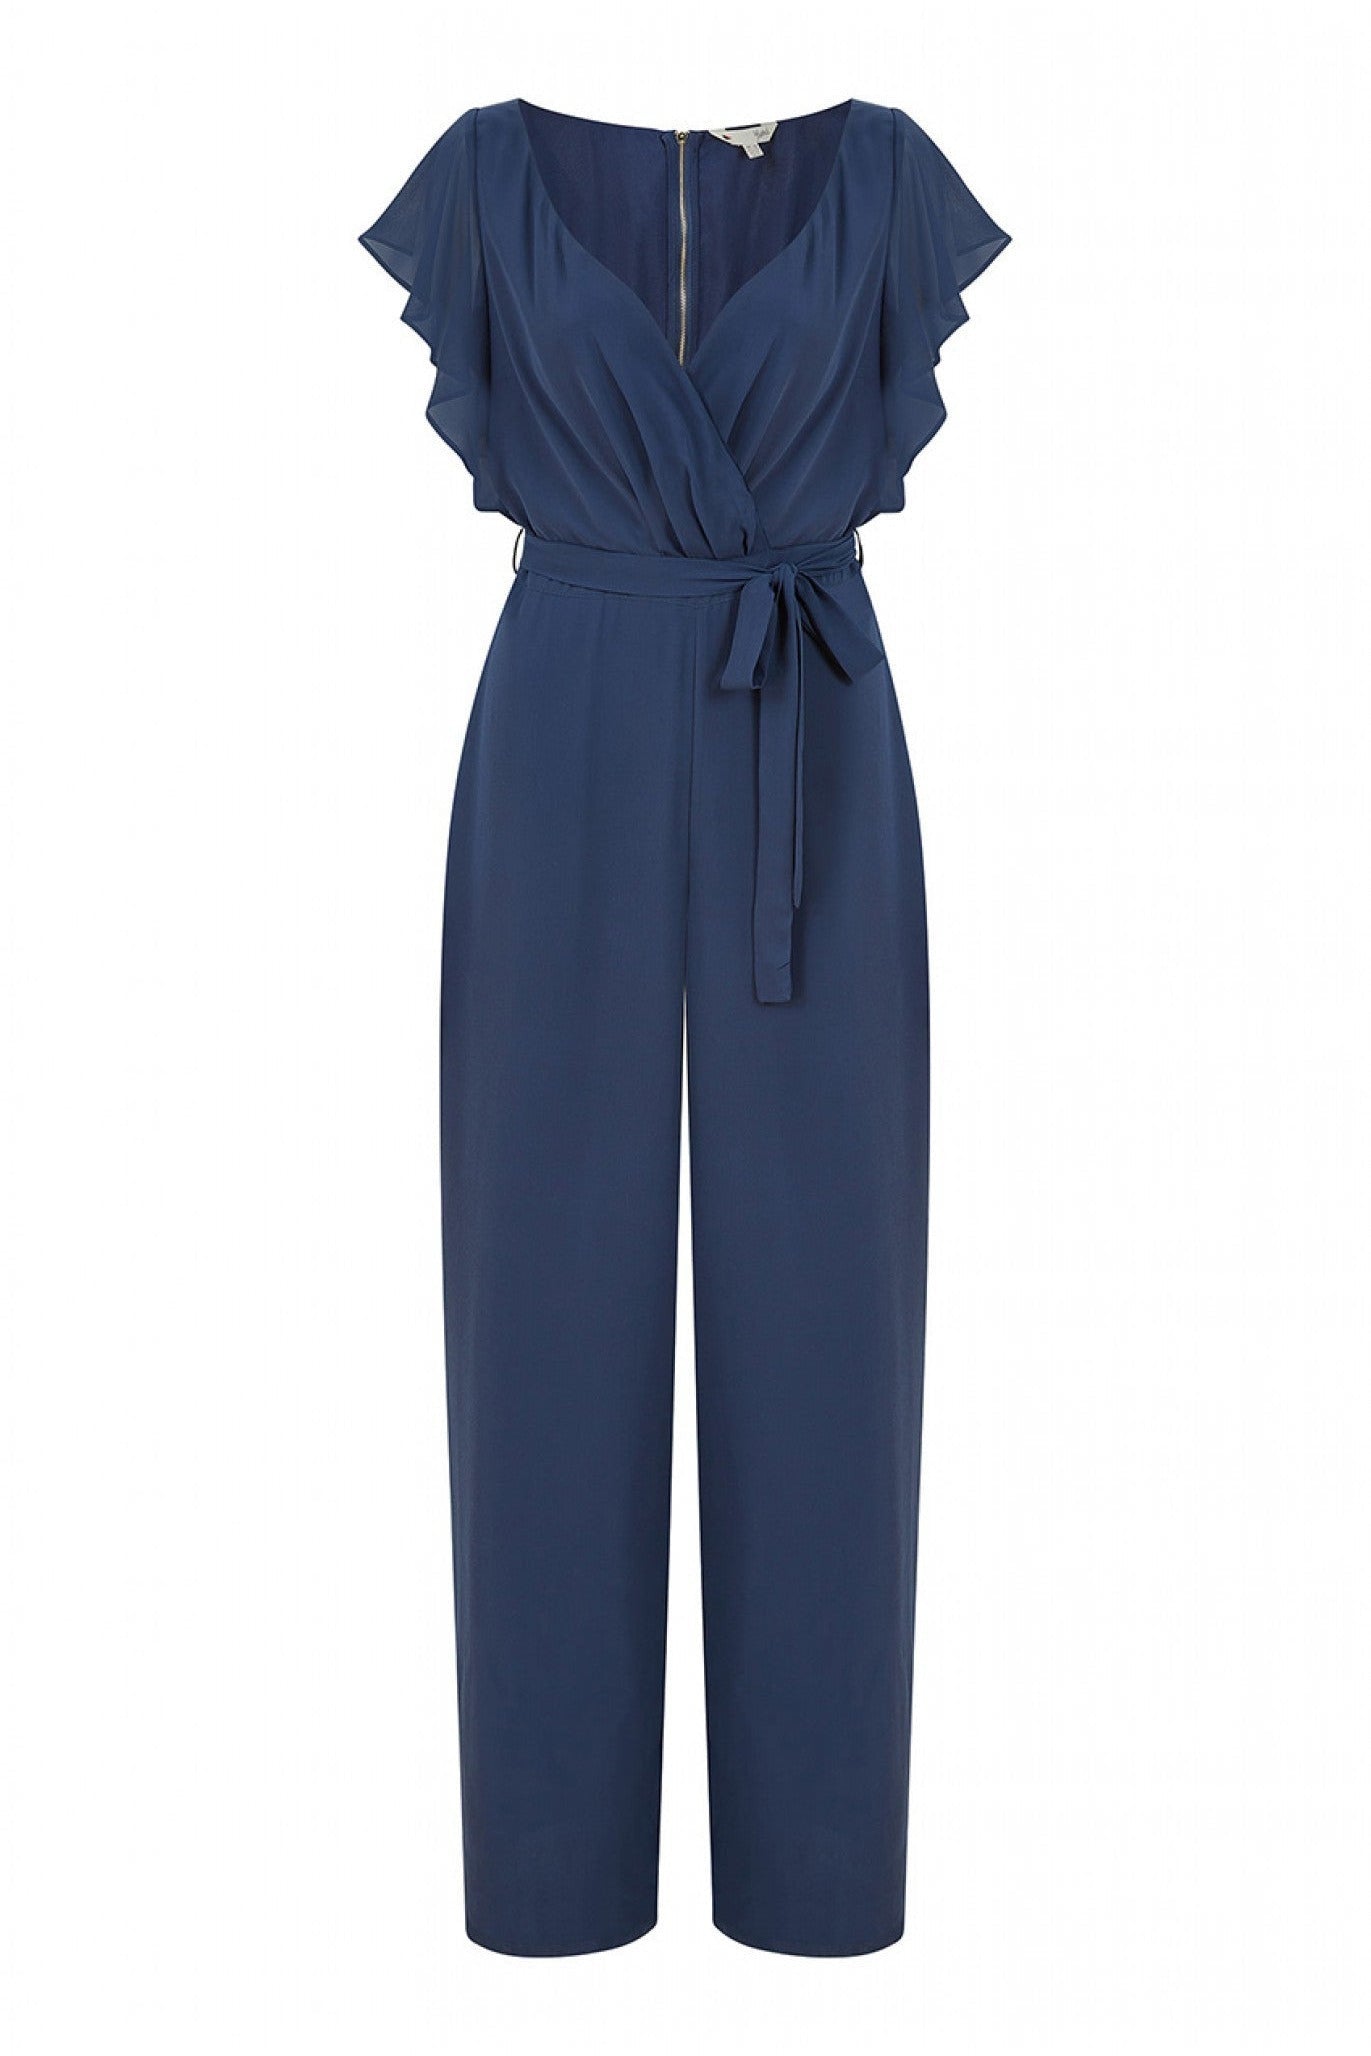 Navy Wrap Jumpsuit With Ruffle Sleeves YM3827027